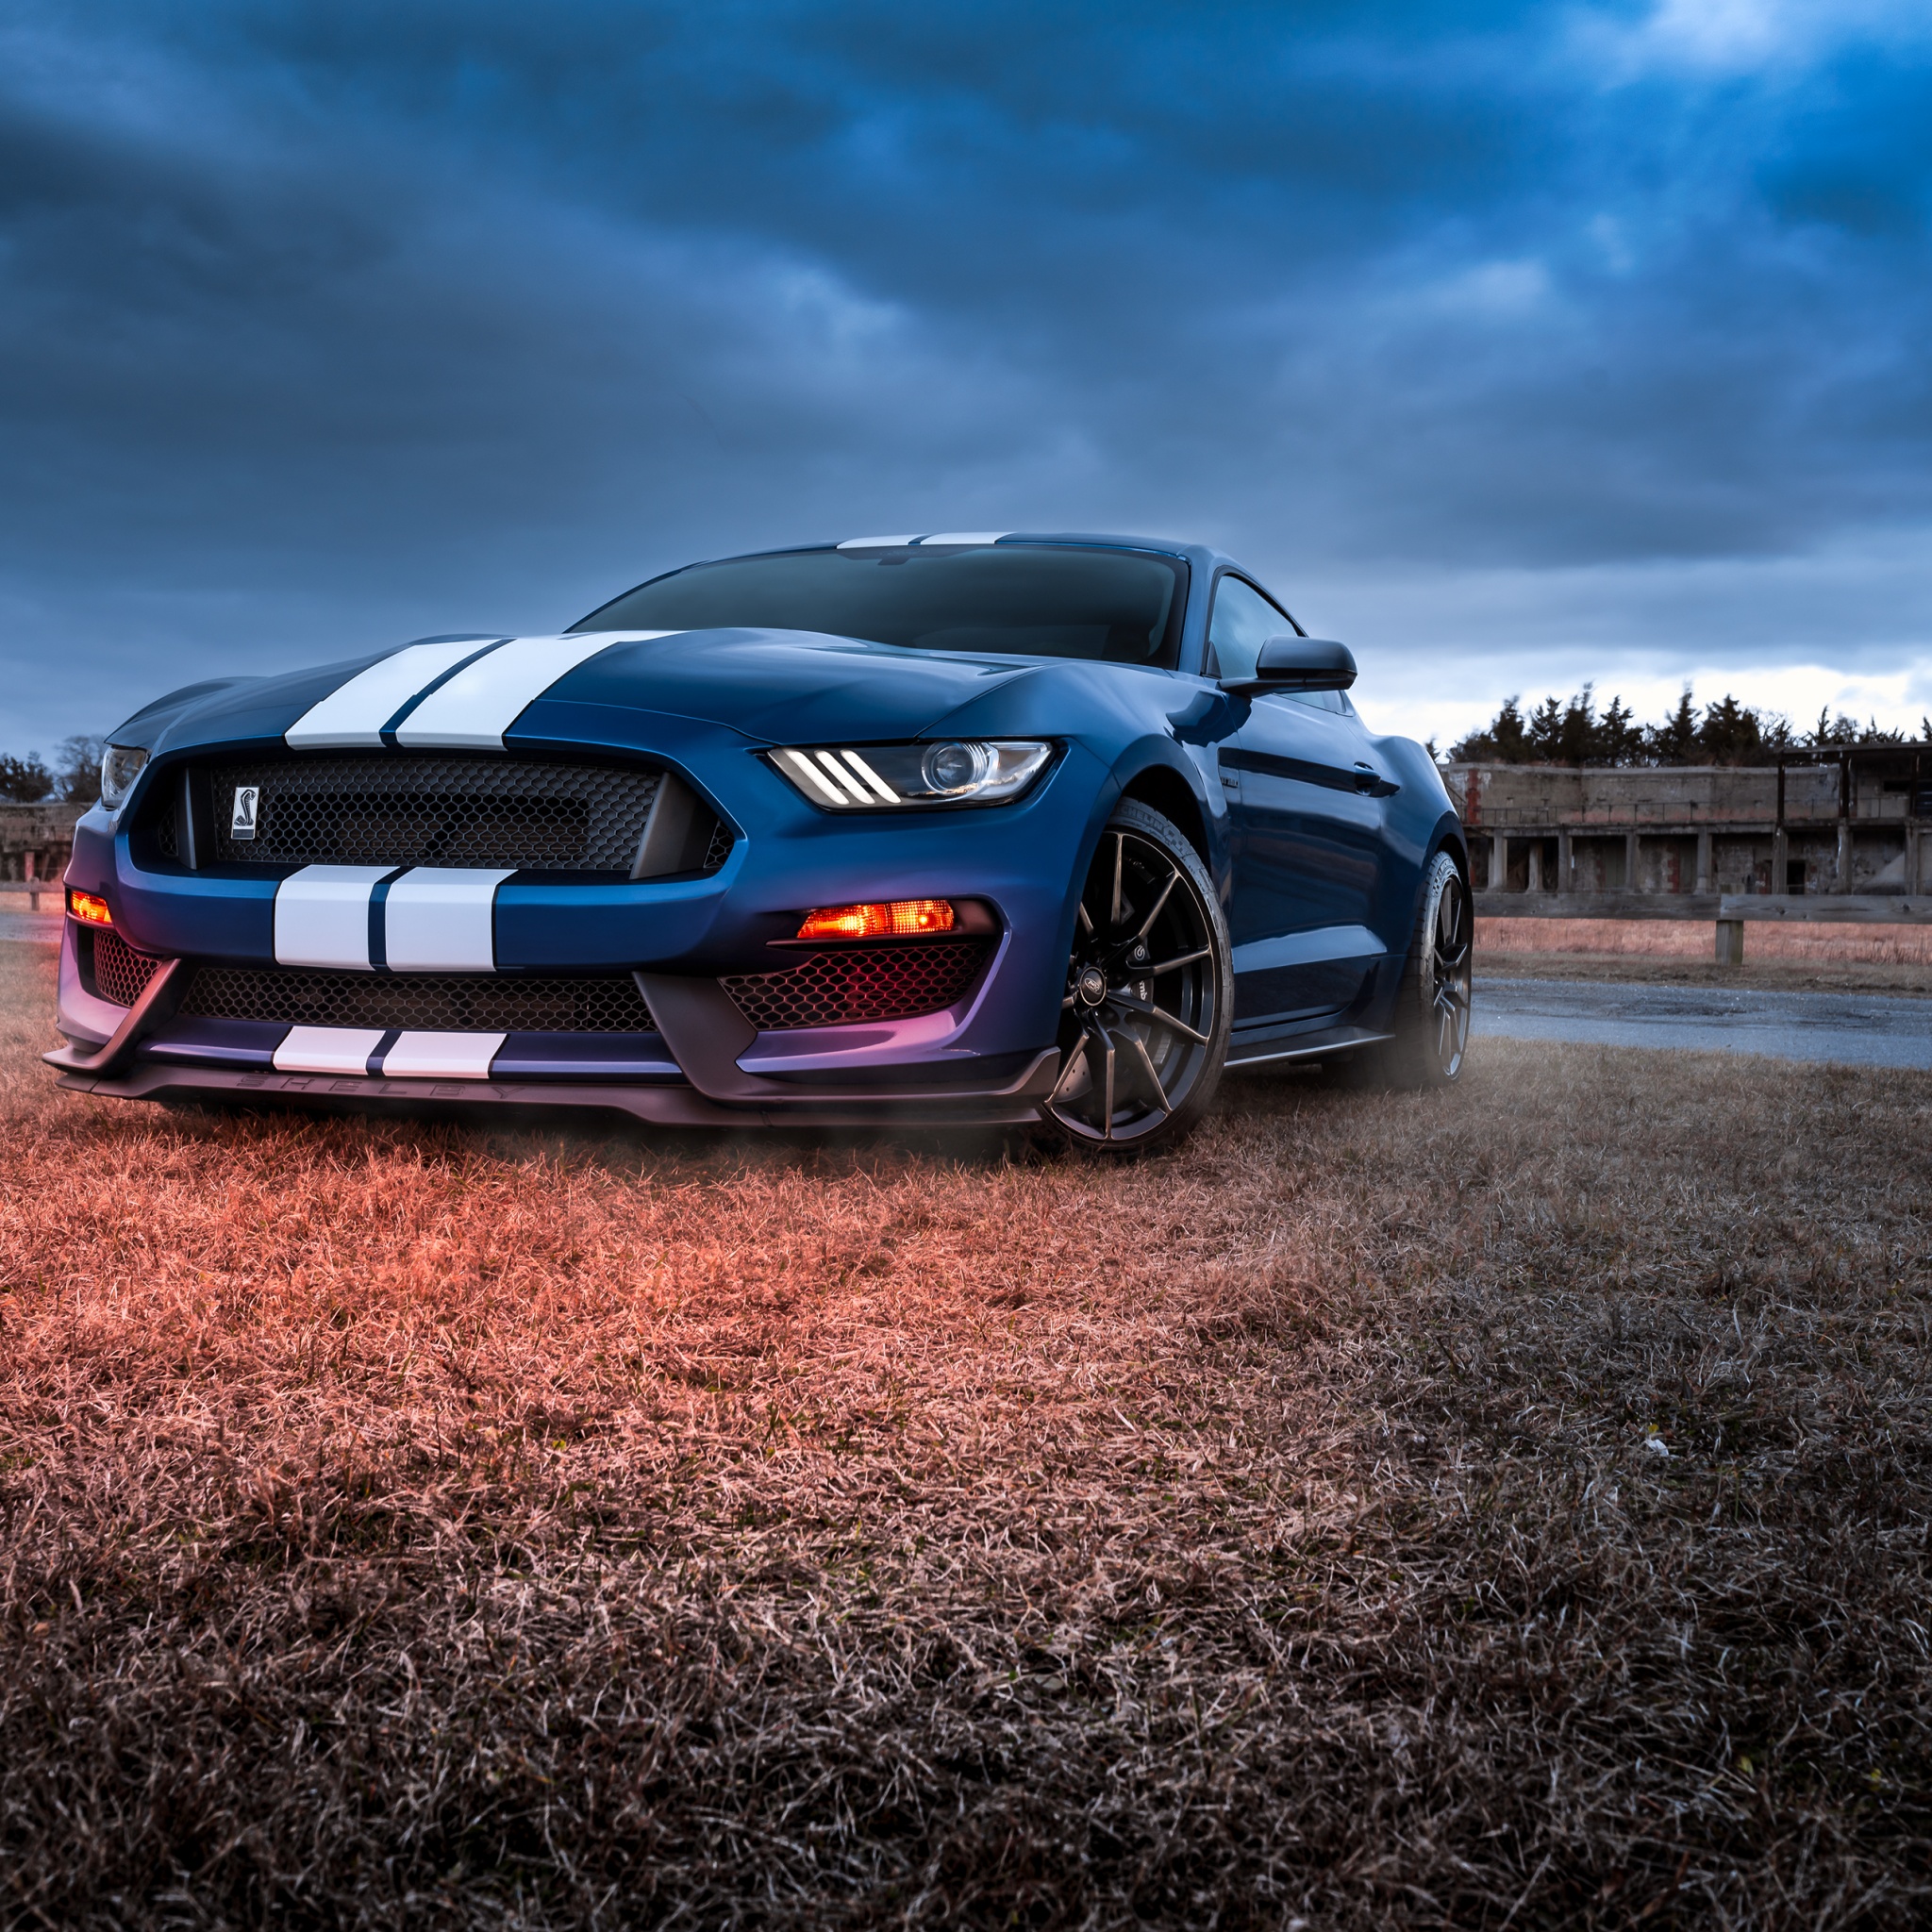 Ford Mustang Shelby GT500 Wallpaper 4K, Muscle cars, Cars, #2718